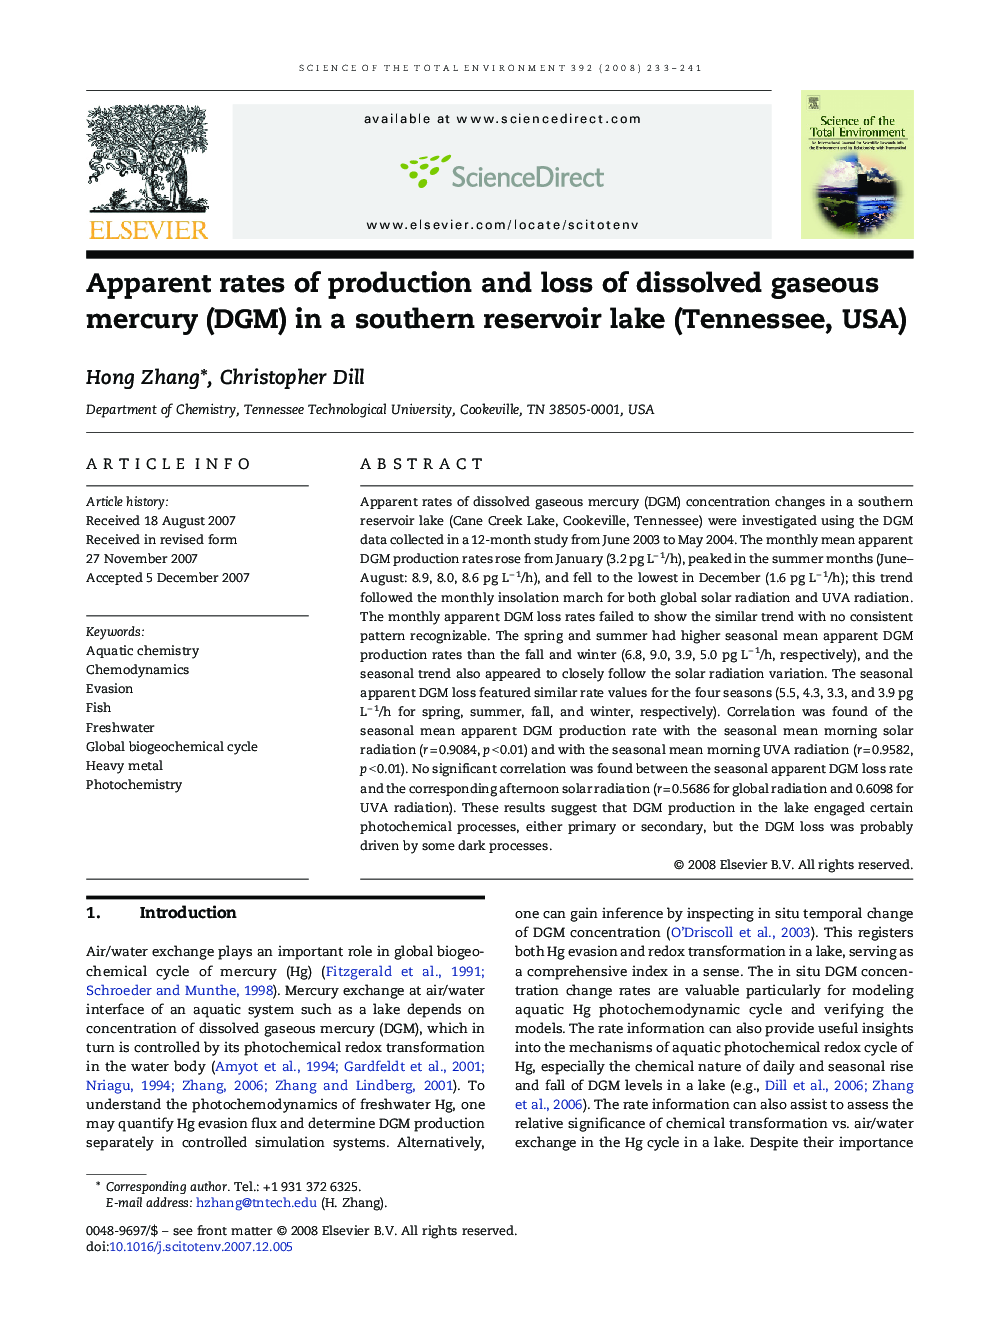 Apparent rates of production and loss of dissolved gaseous mercury (DGM) in a southern reservoir lake (Tennessee, USA)